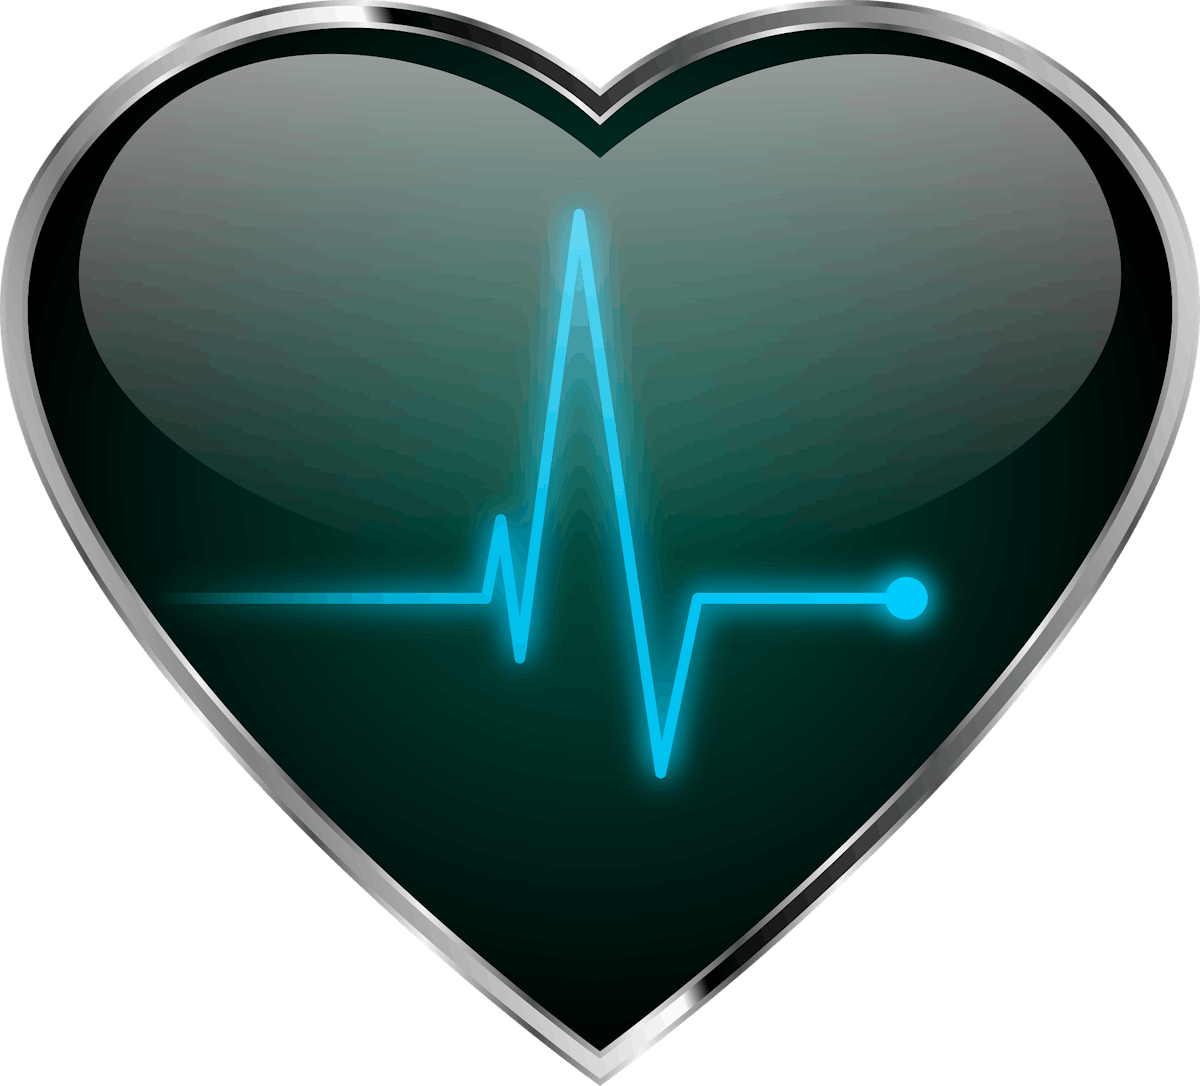 Heart Cardio Blue Image By Peter Lomas From Pixabay